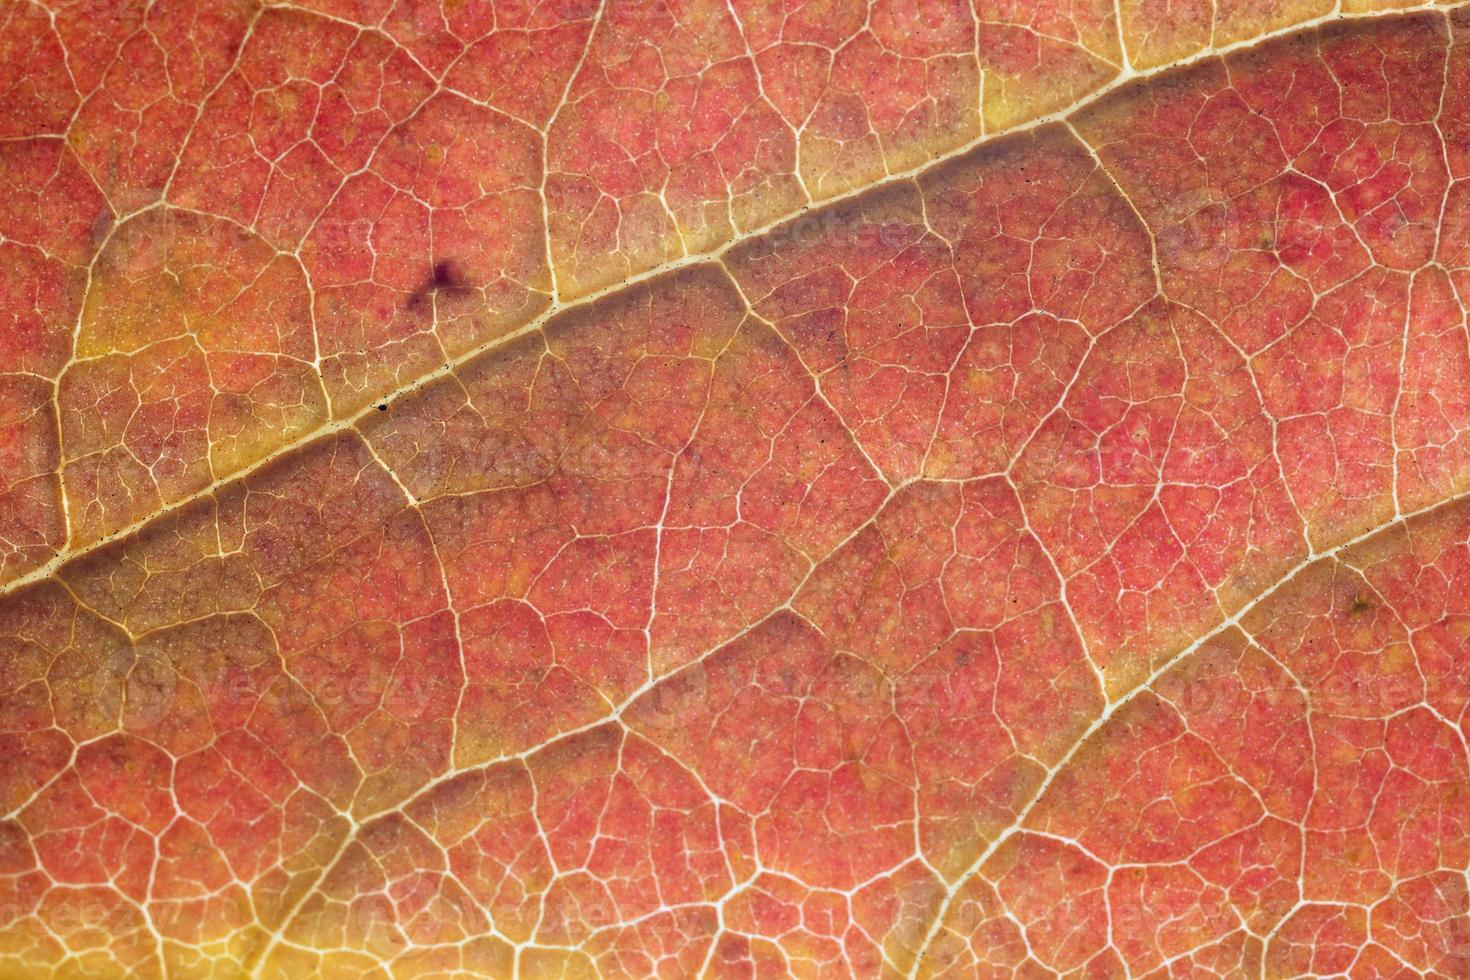 Stunning macro detail of leaf structure photo